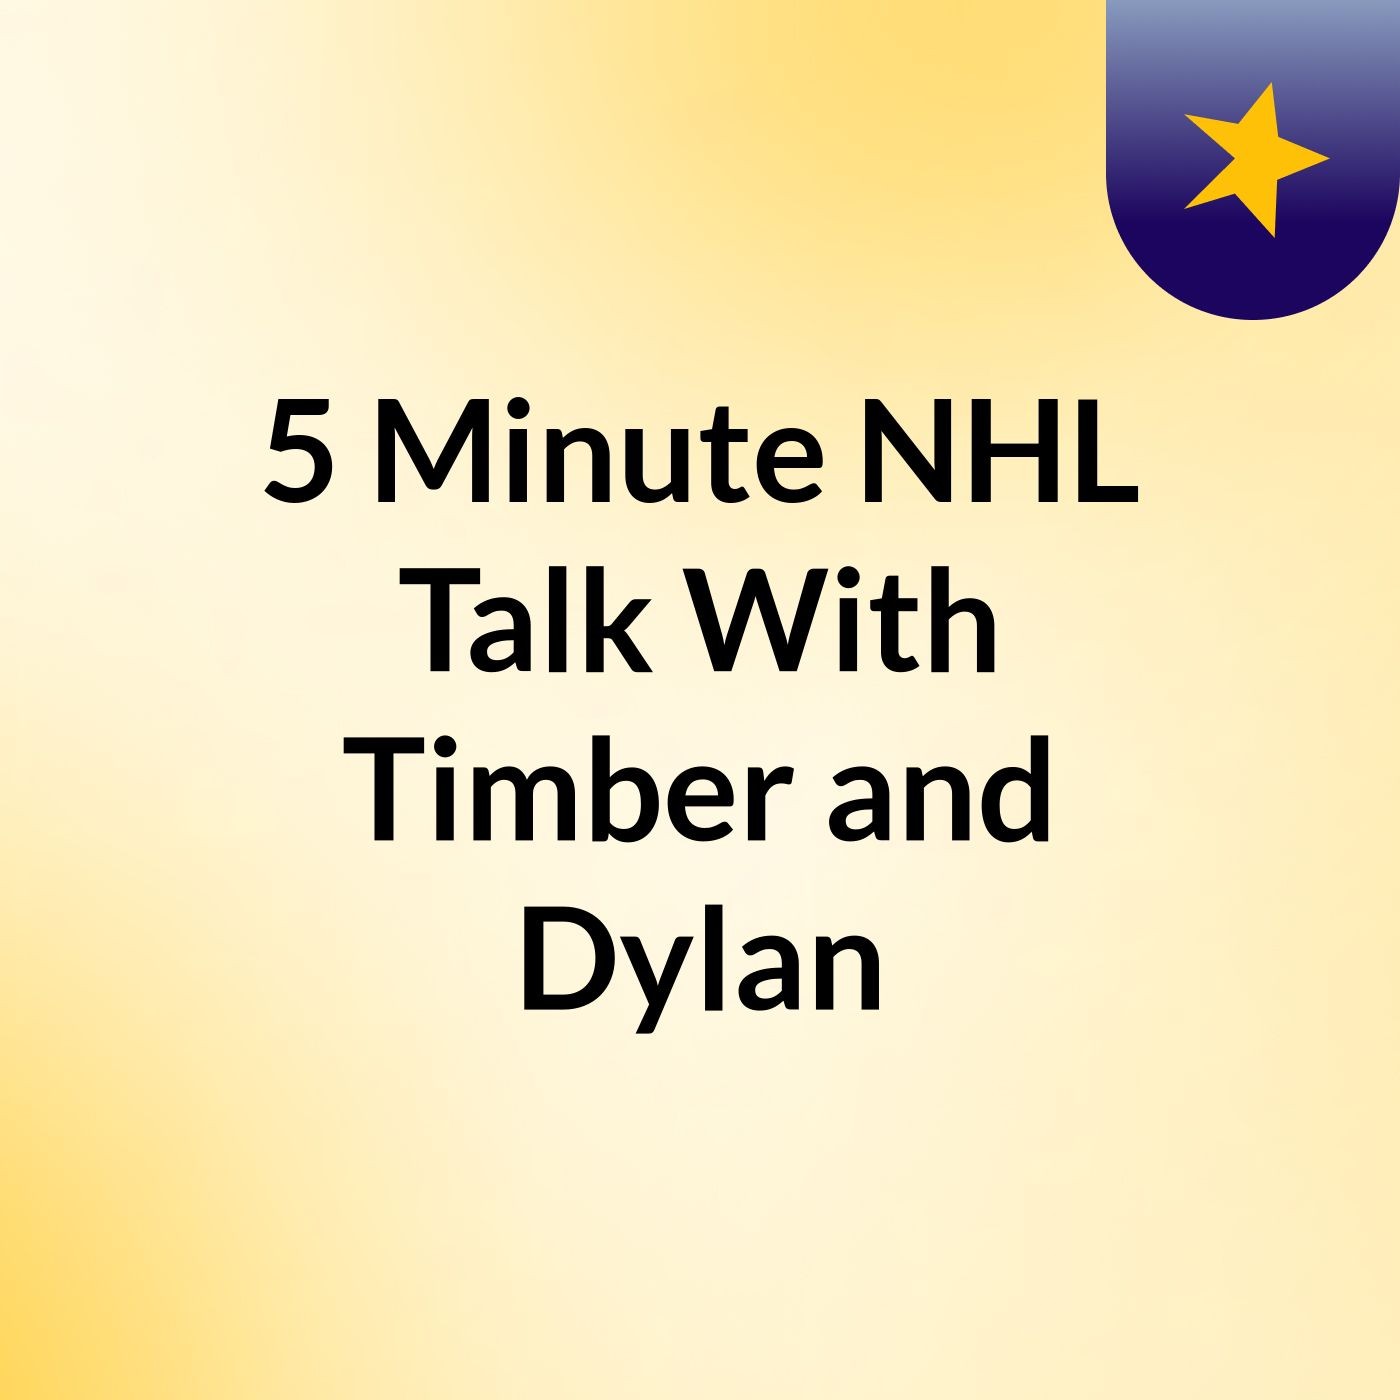 5 Minute NHL Talk With Timber and Dylan